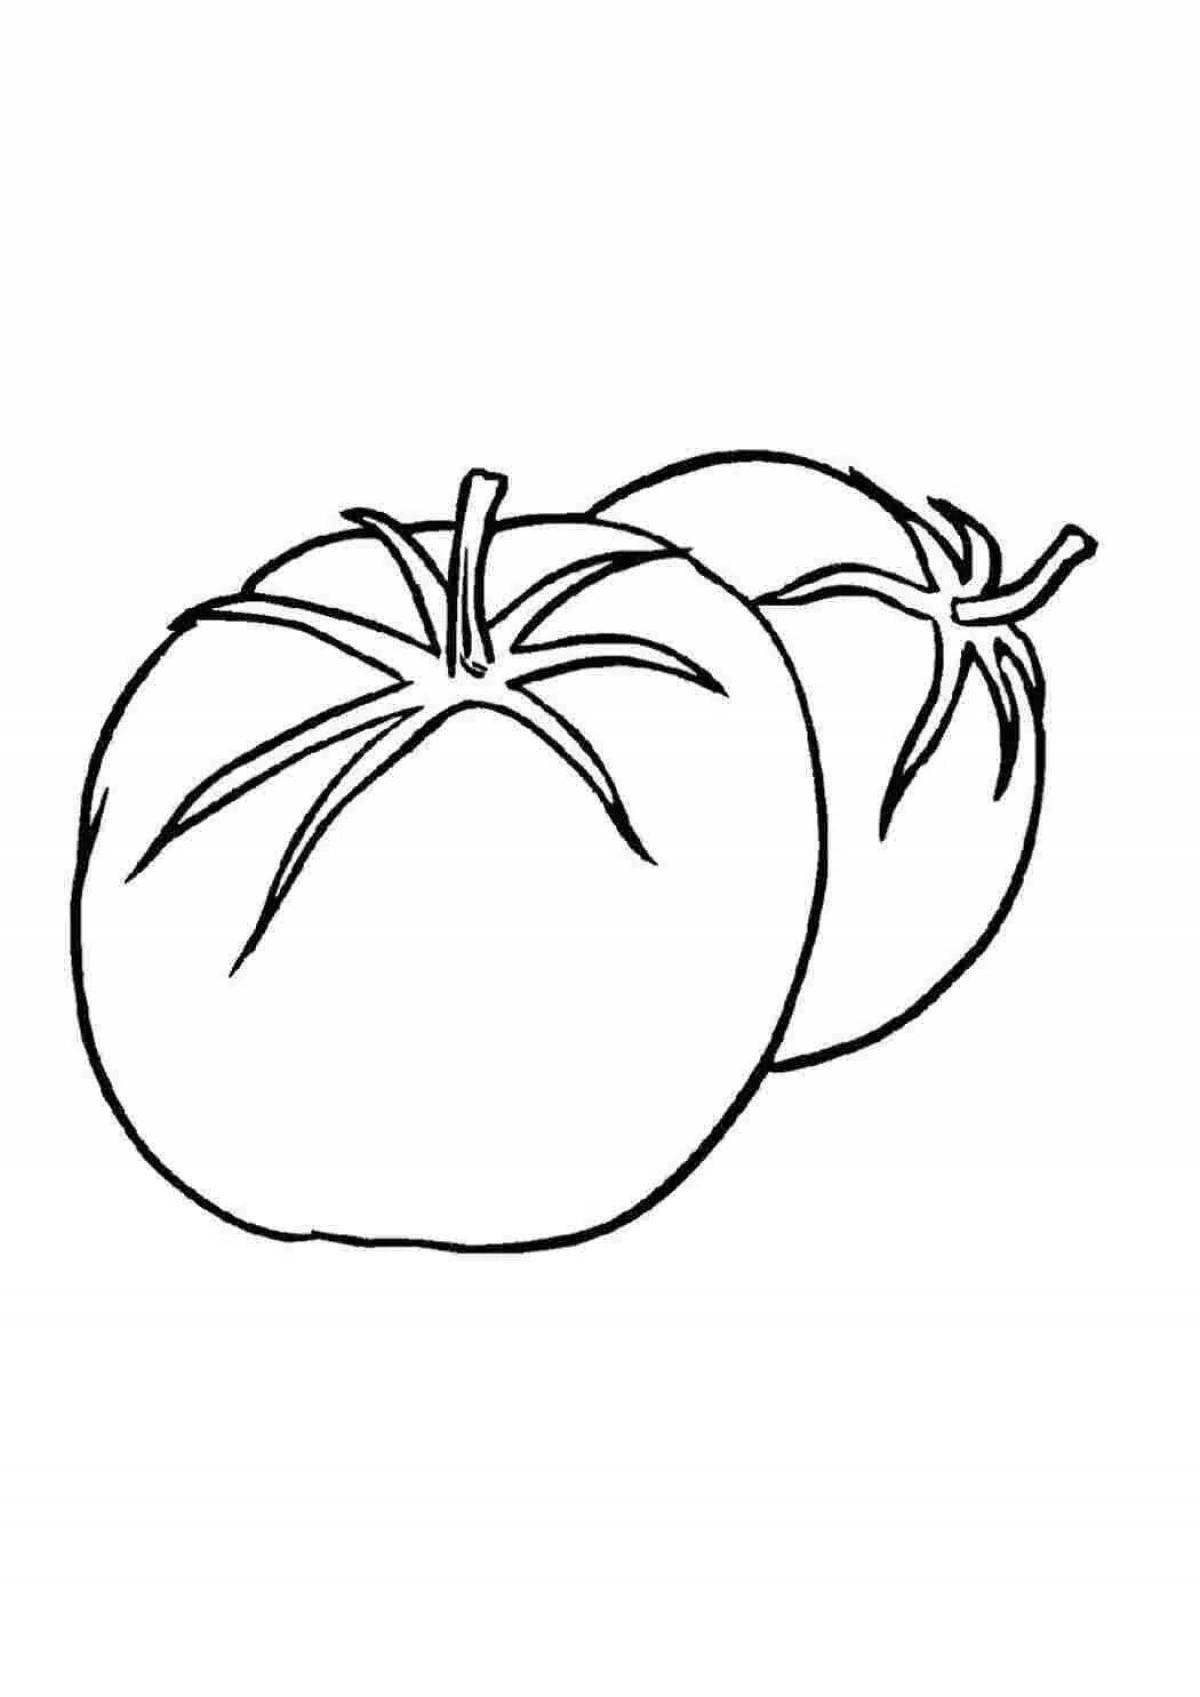 Coloring pages with bright tomatoes for children 3-4 years old